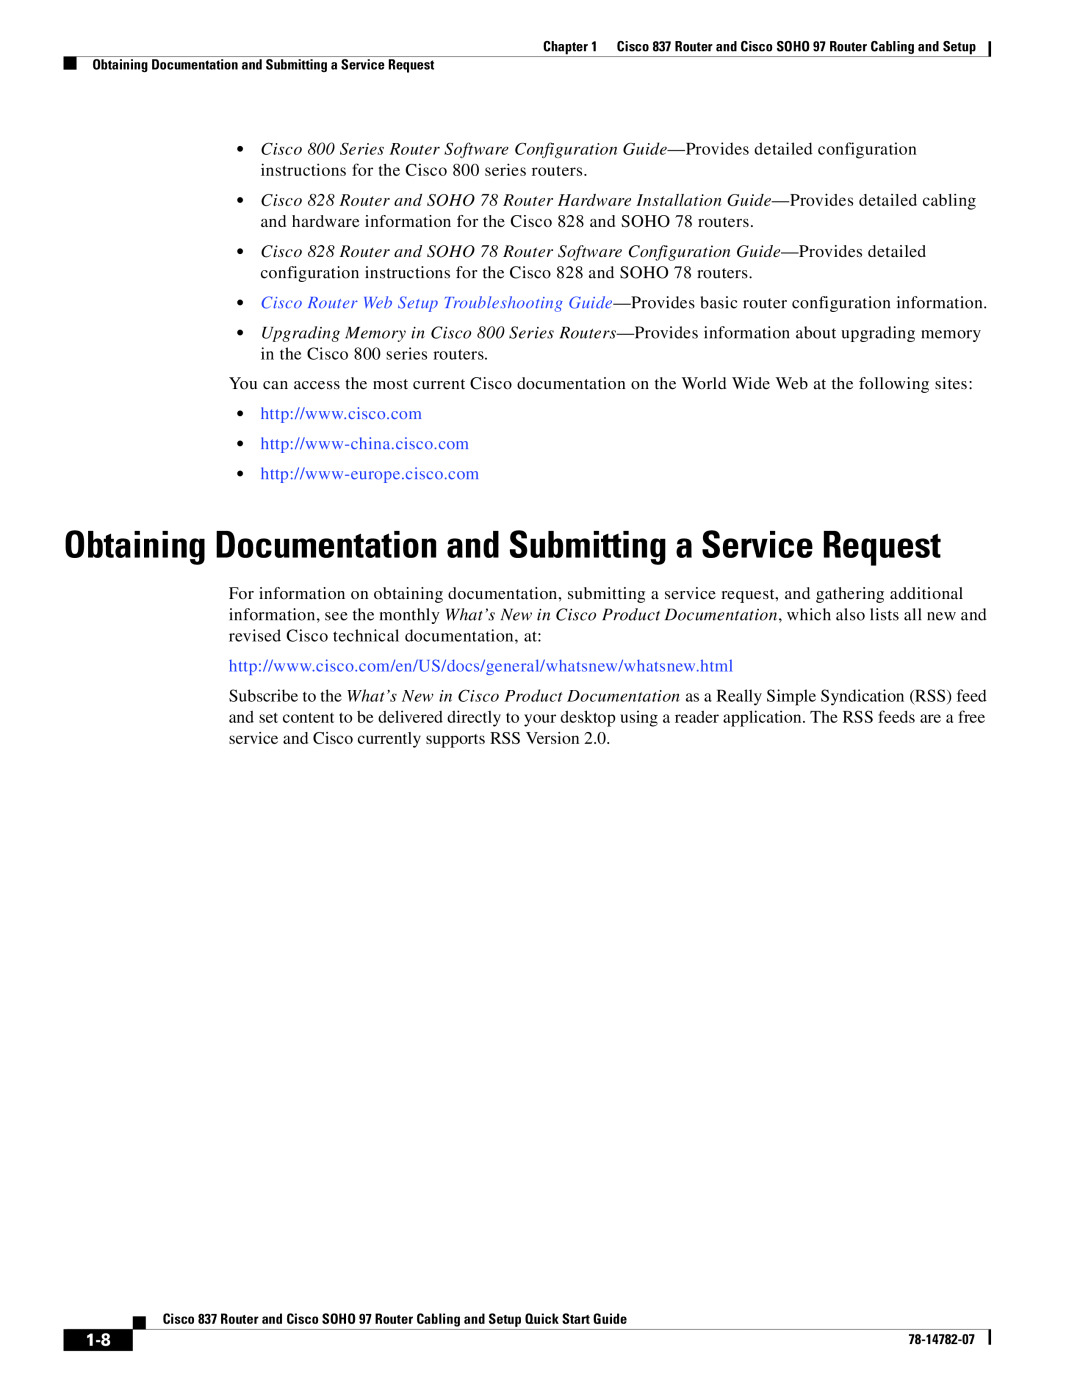 Cisco Systems SOHO 97 quick start Obtaining Documentation and Submitting a Service Request 